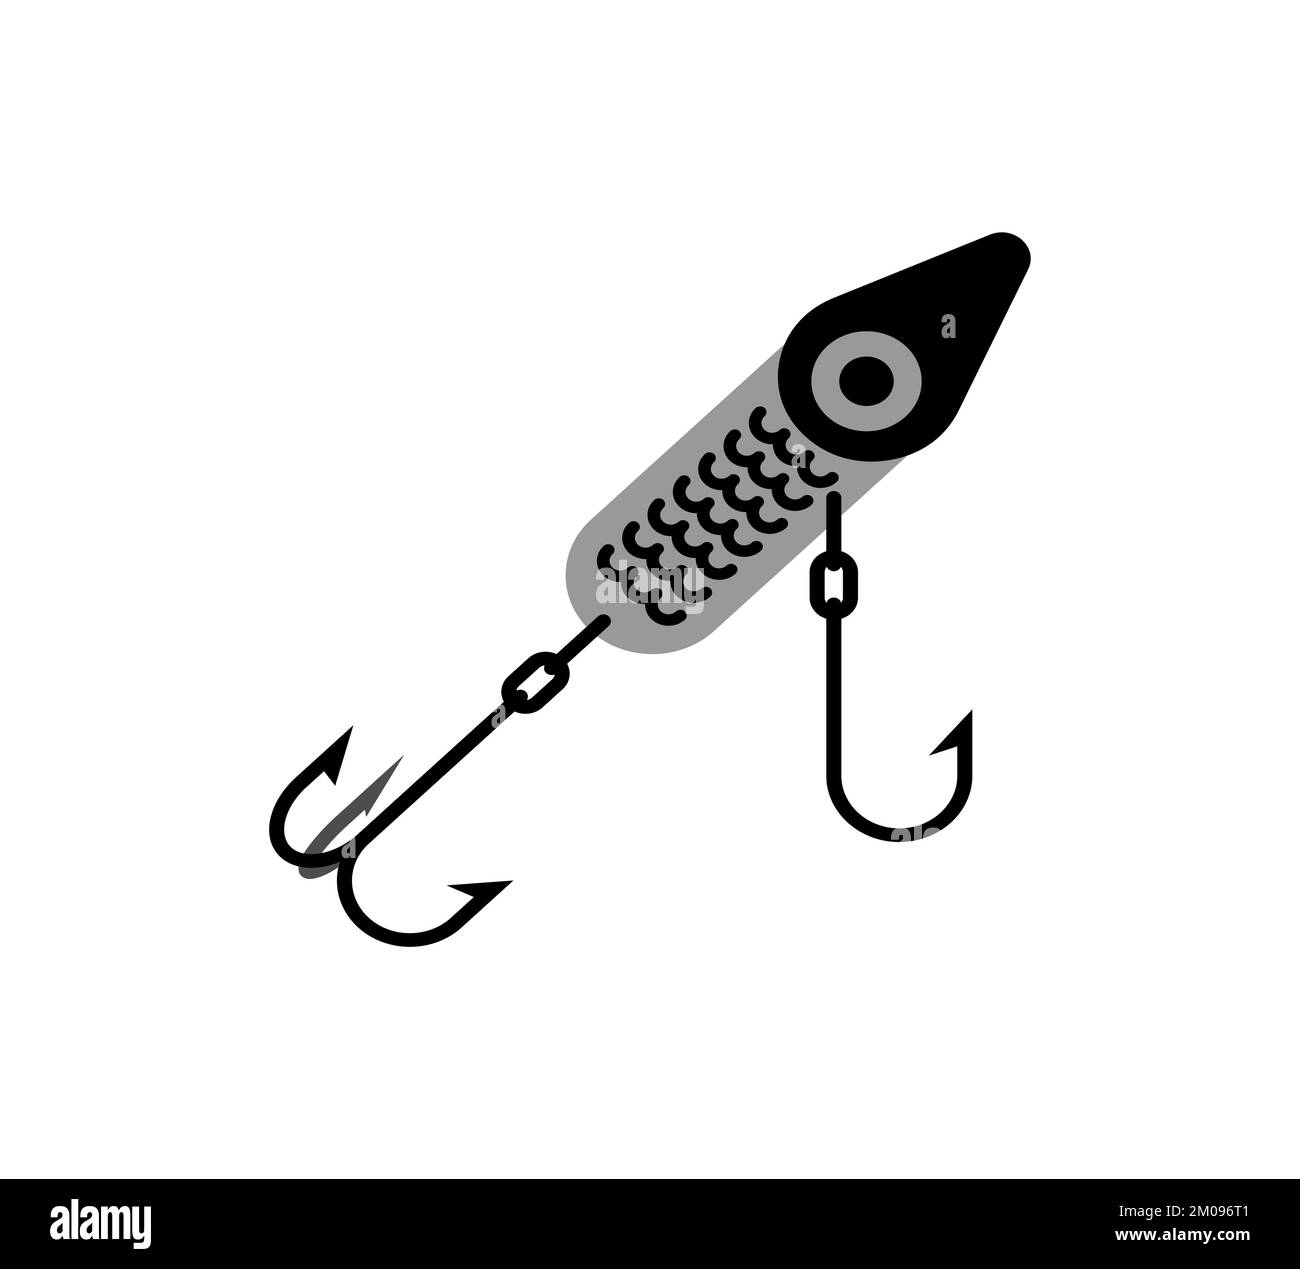 Spinner fishing tackle. Vector illustration. Accessory for fishing Stock Vector